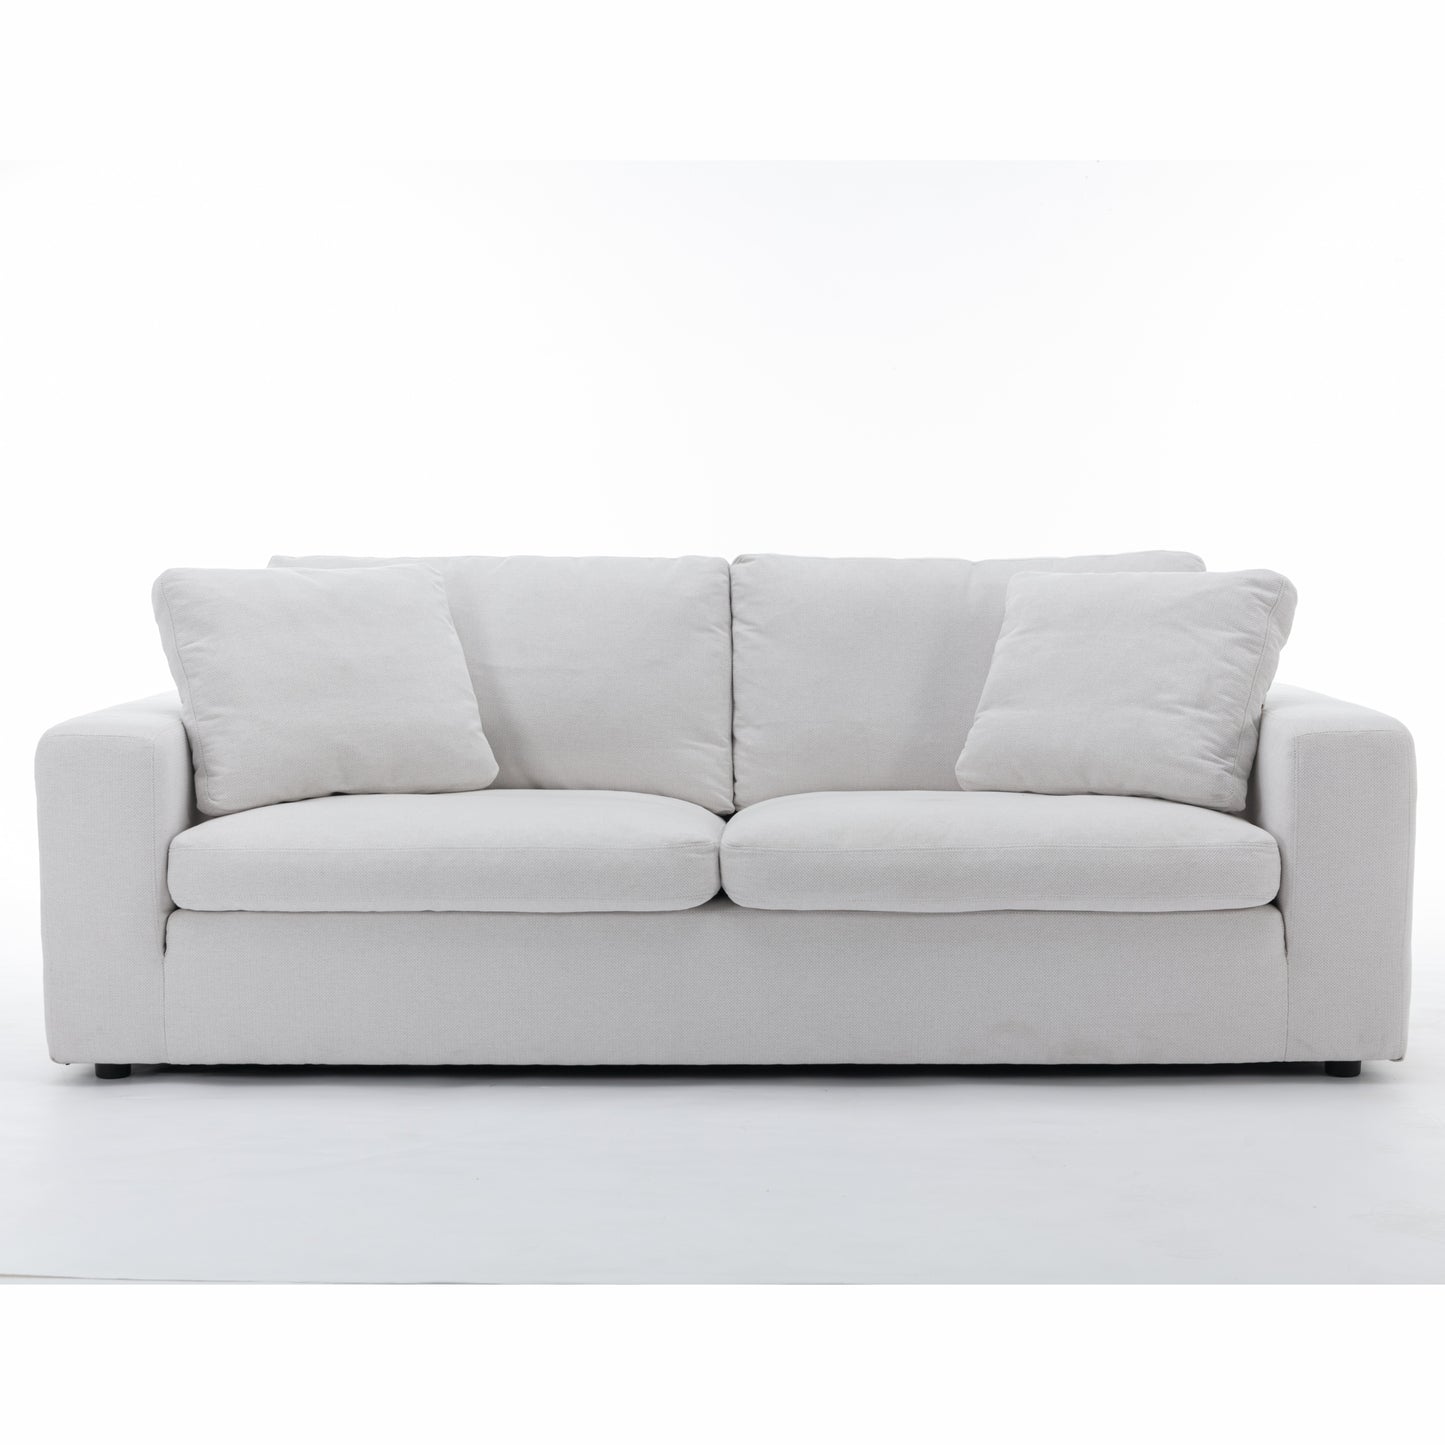 COLAMY 90" Fabric Modern Sofa with Removable Back and Seat Cushions